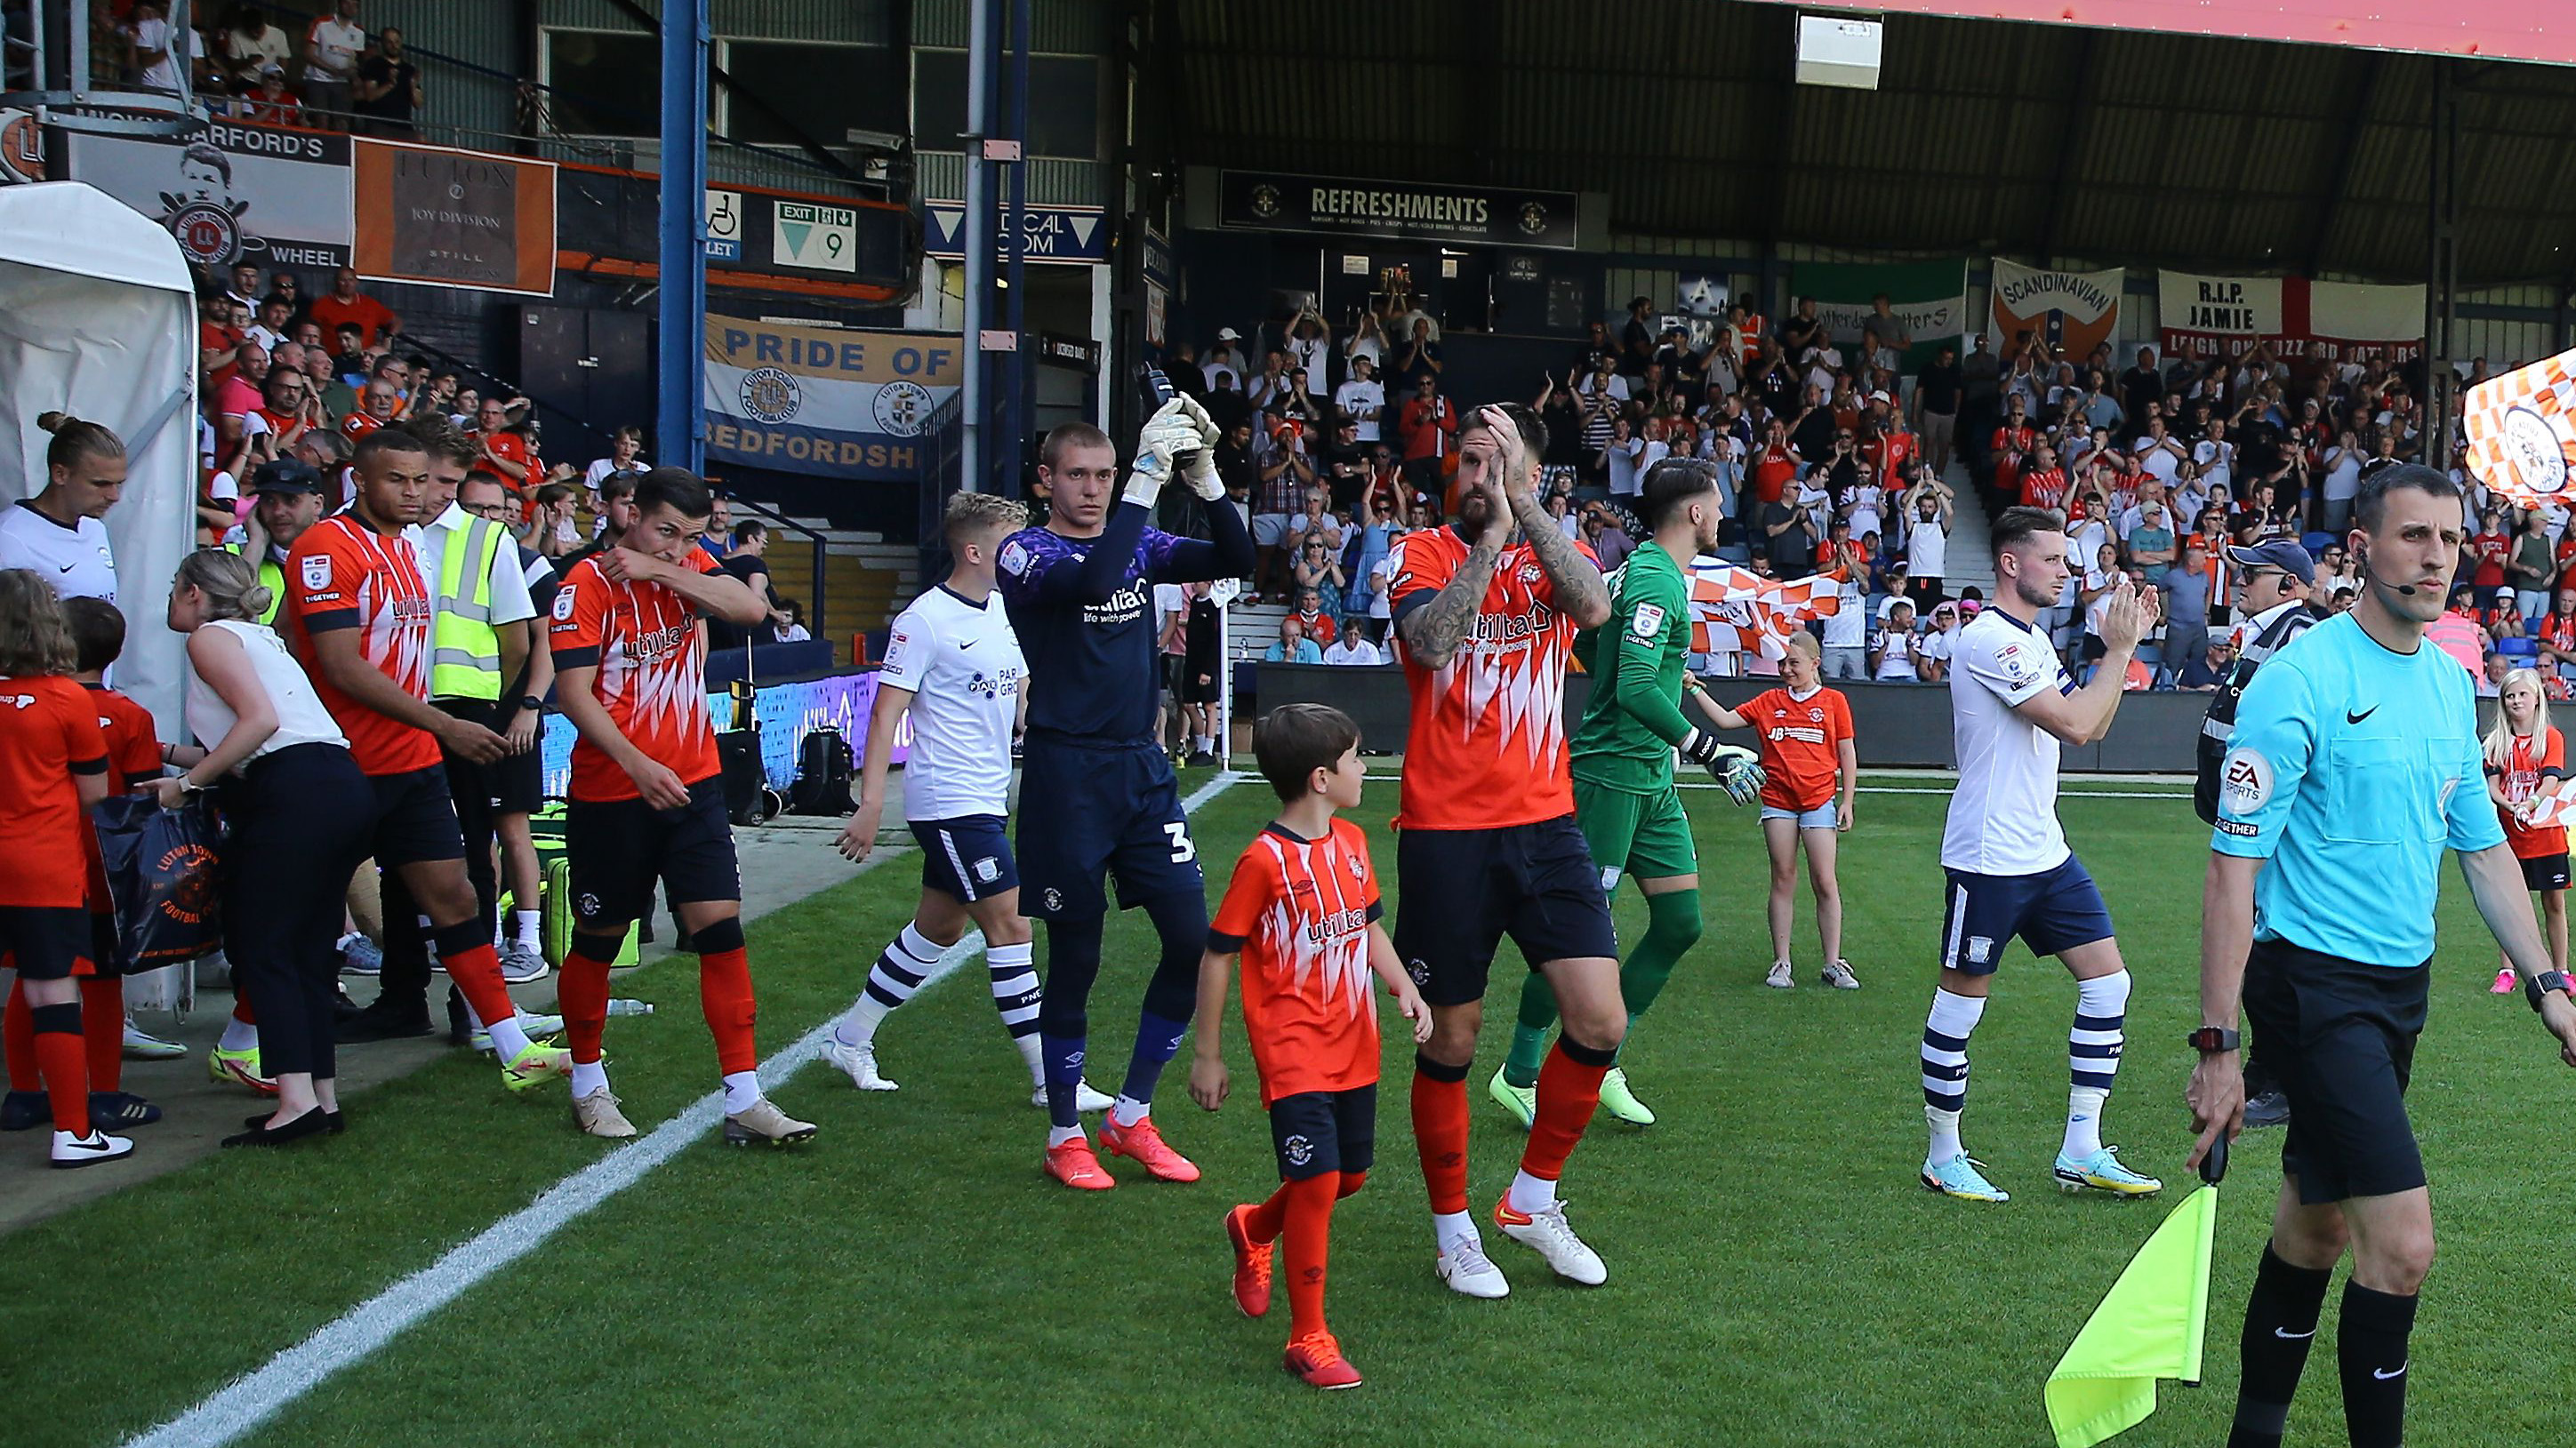 Luton Town team walking out of the tunnel at their home ground